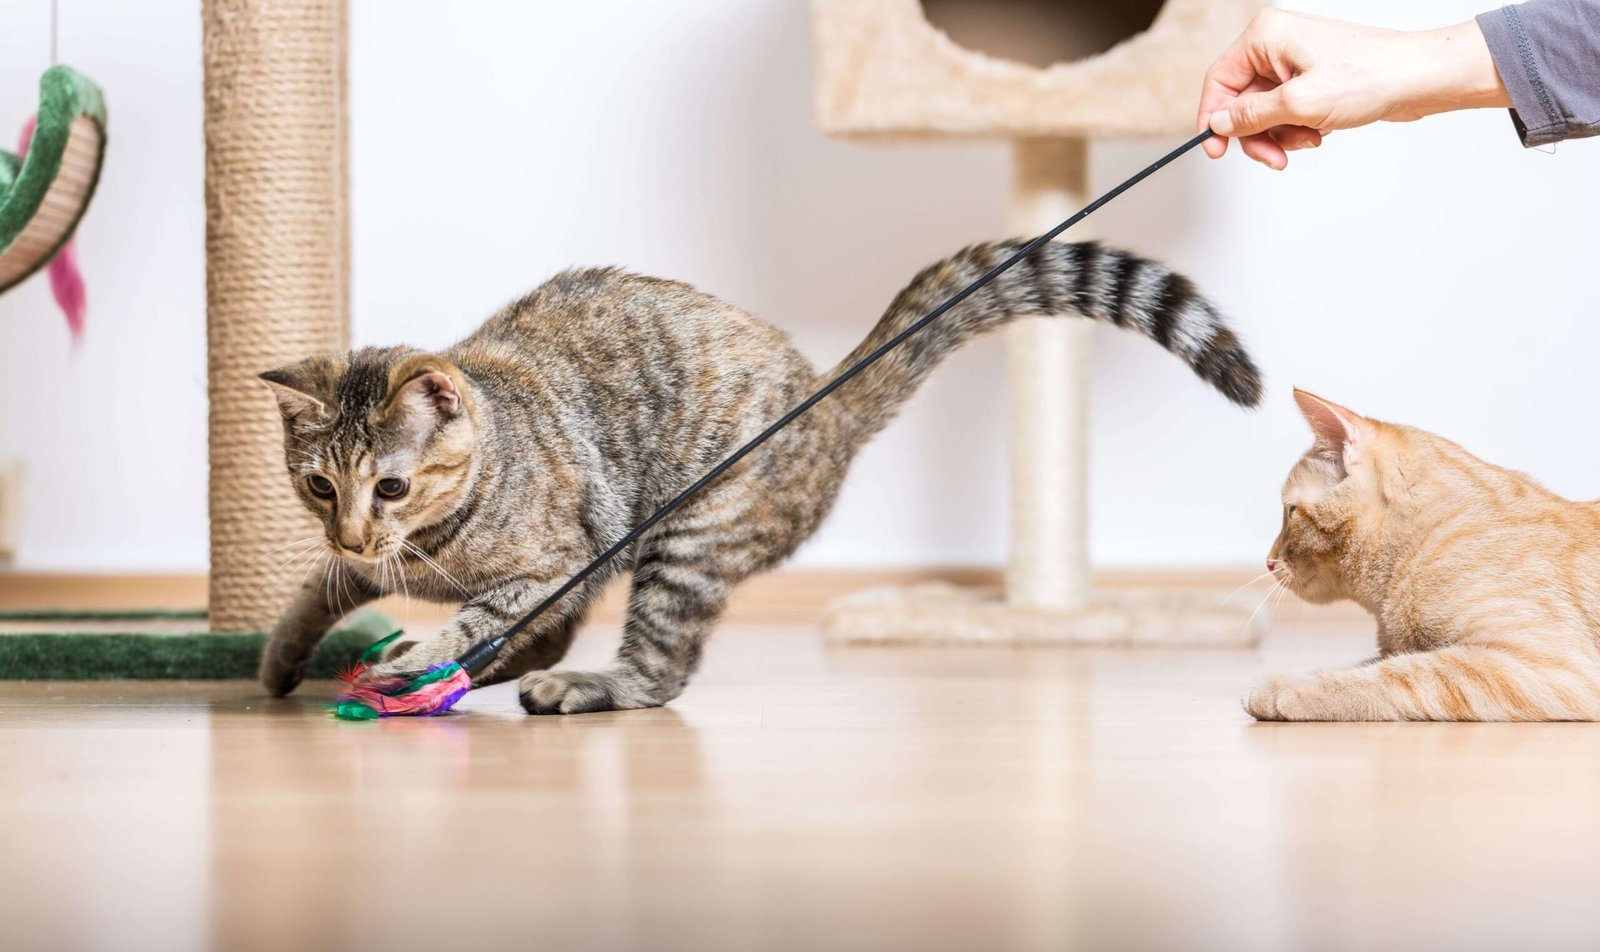 Providing Enrichment and Toys for cat